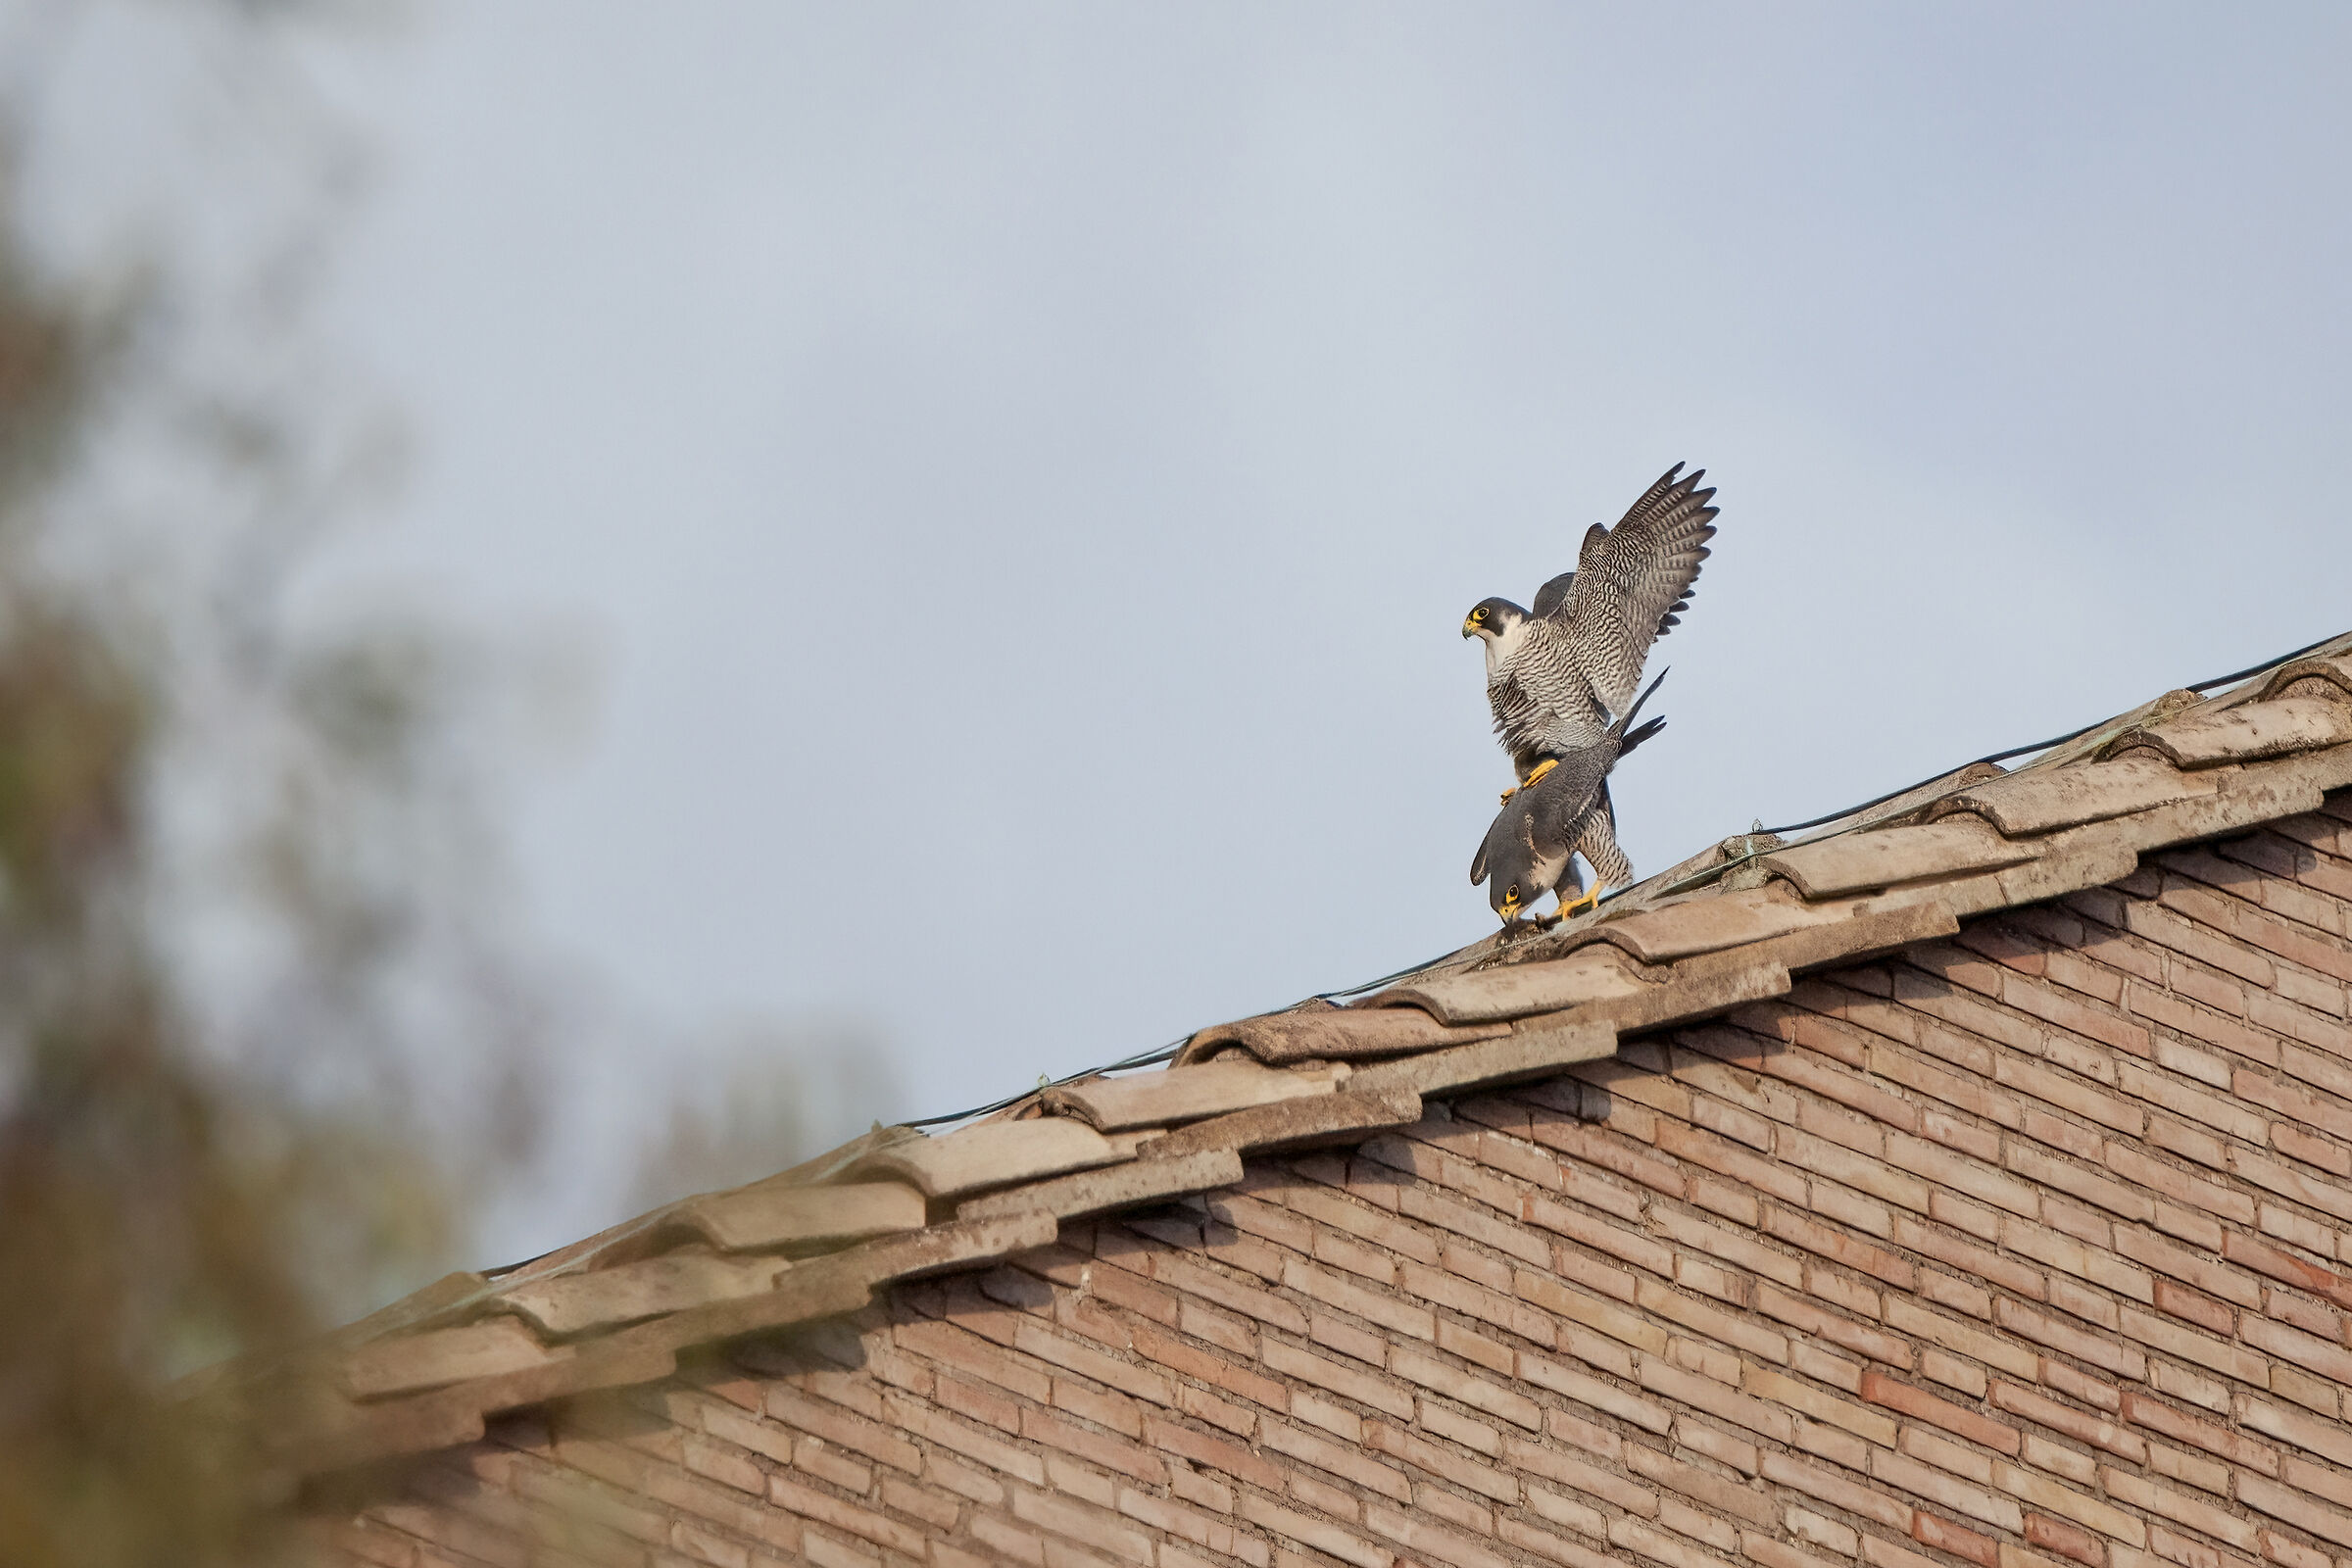 Mating peregrine falcons in Rome...